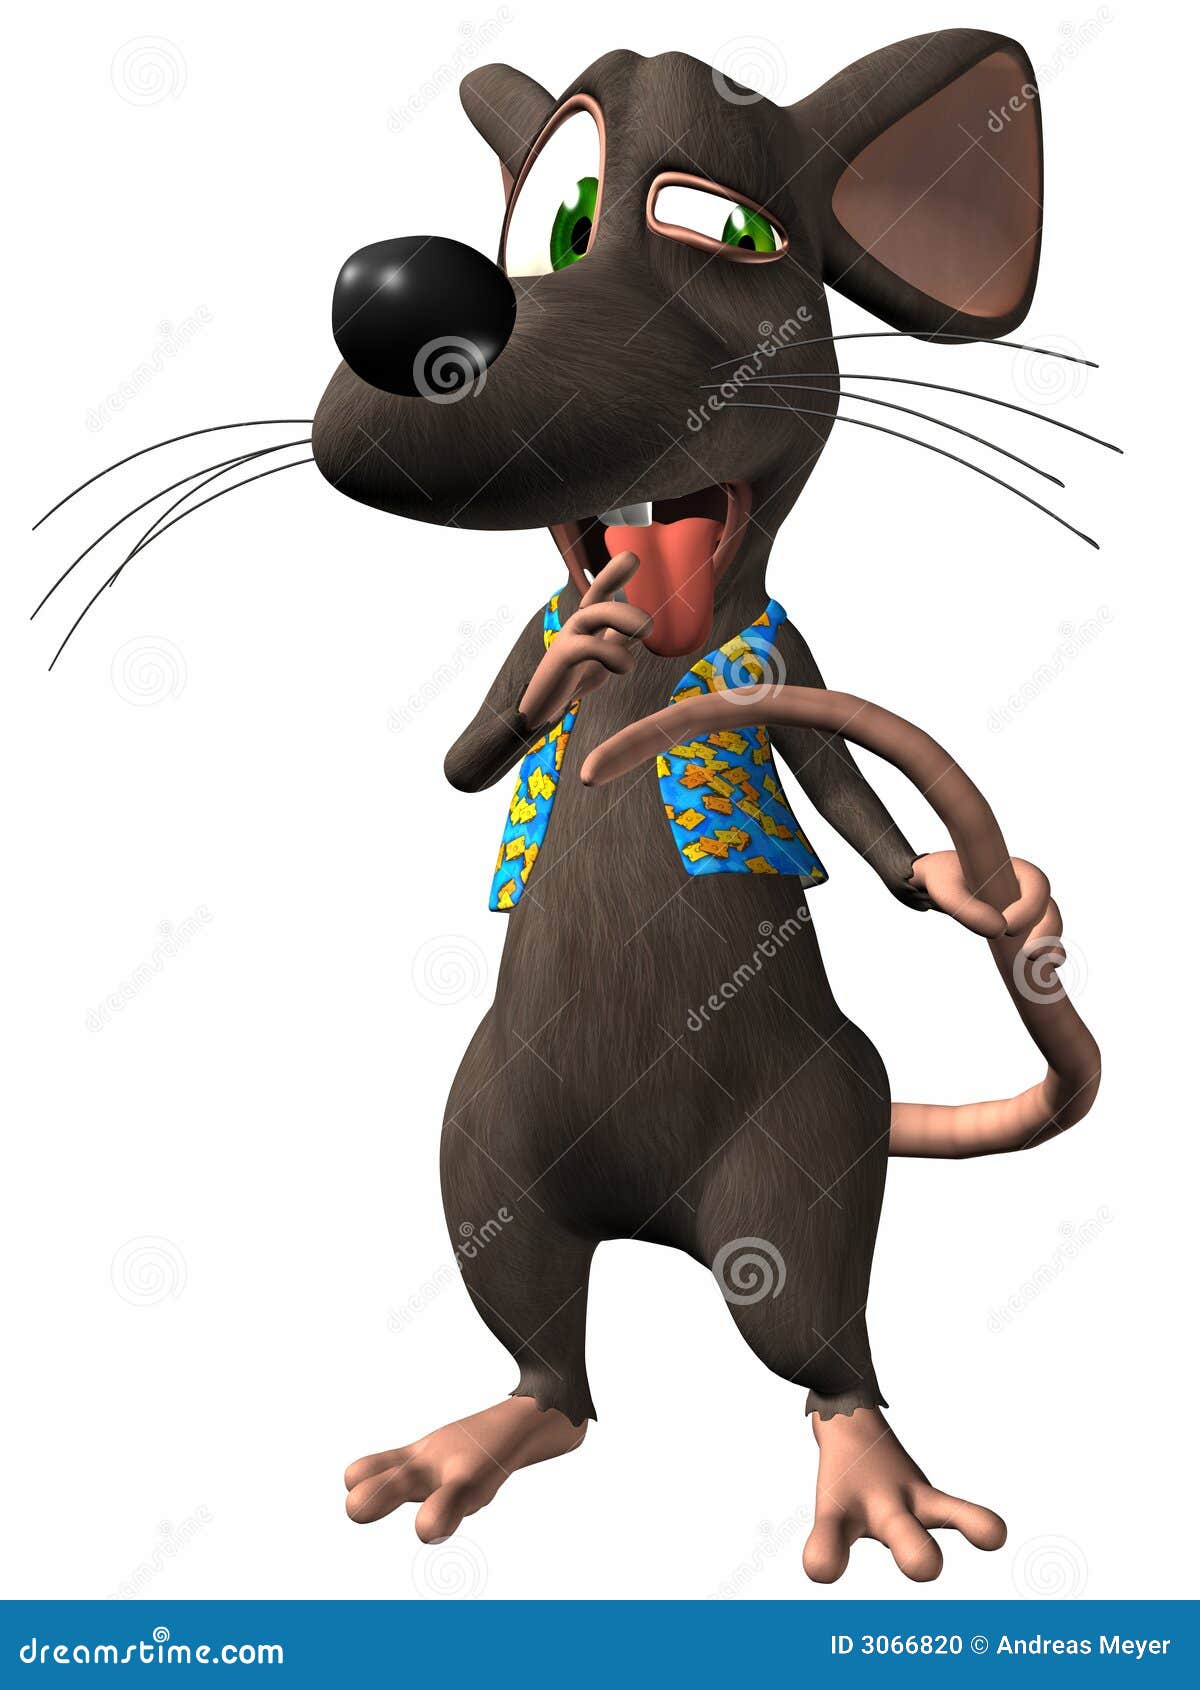 toon mouse